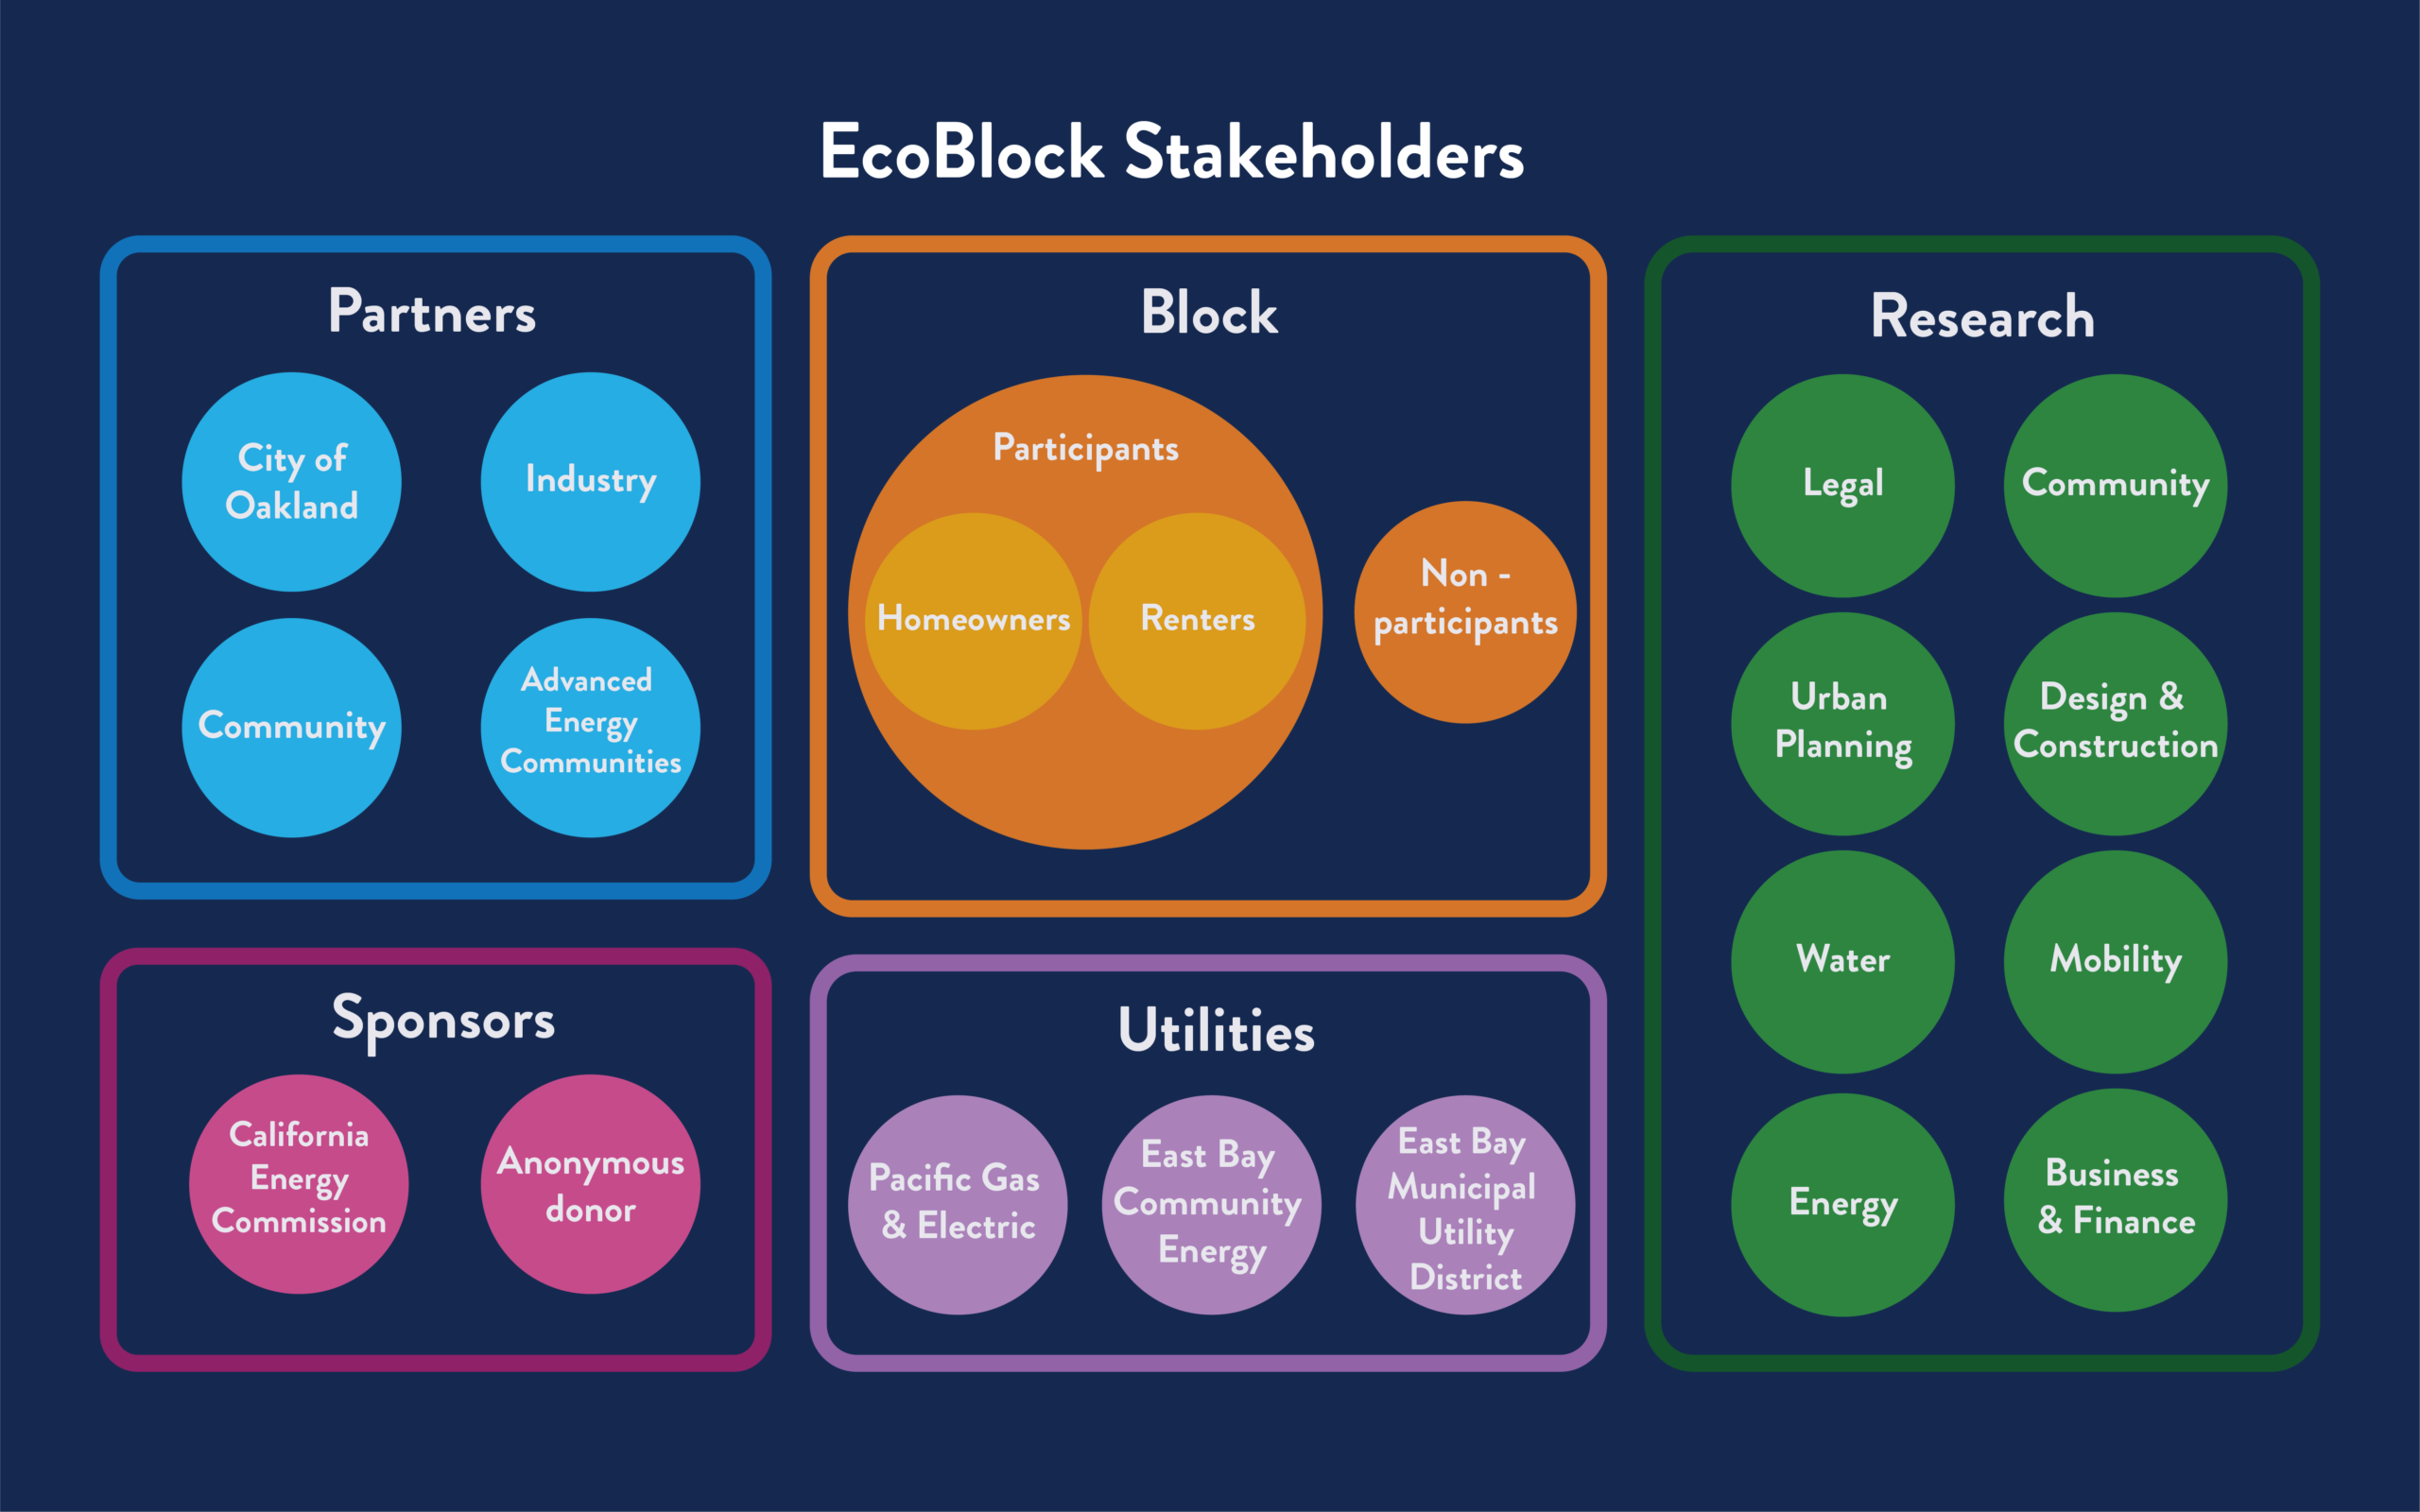 Diagram of EcoBlock stakeholders, including project partners, sponsors, the neighborhood block, utilities, and the research team